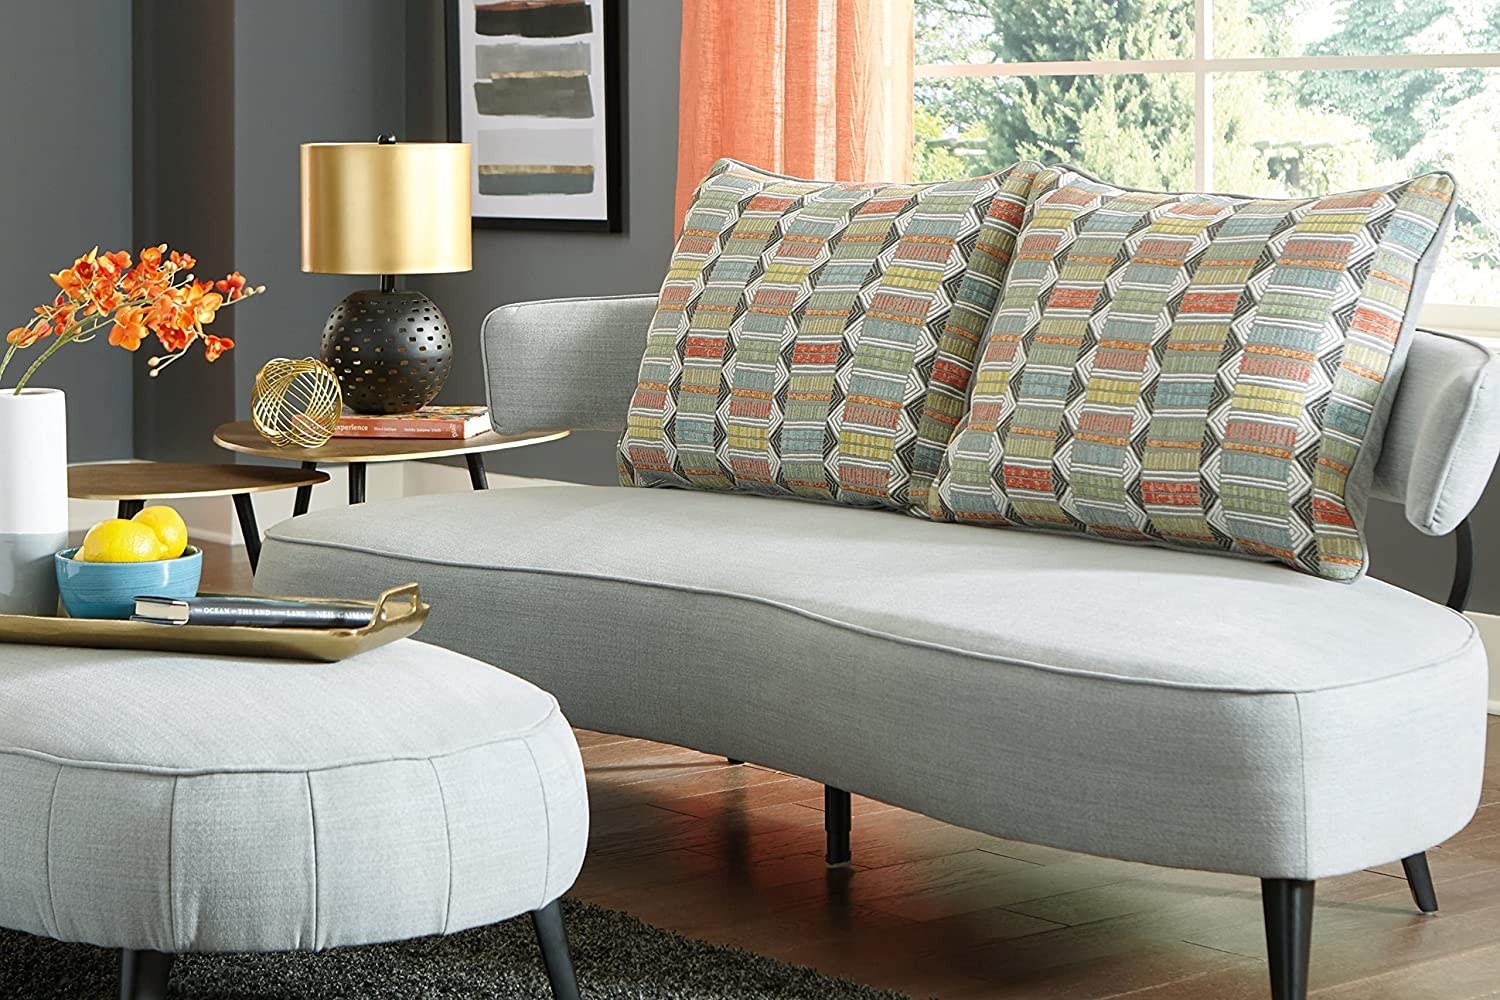 A grey couch in a colorful room